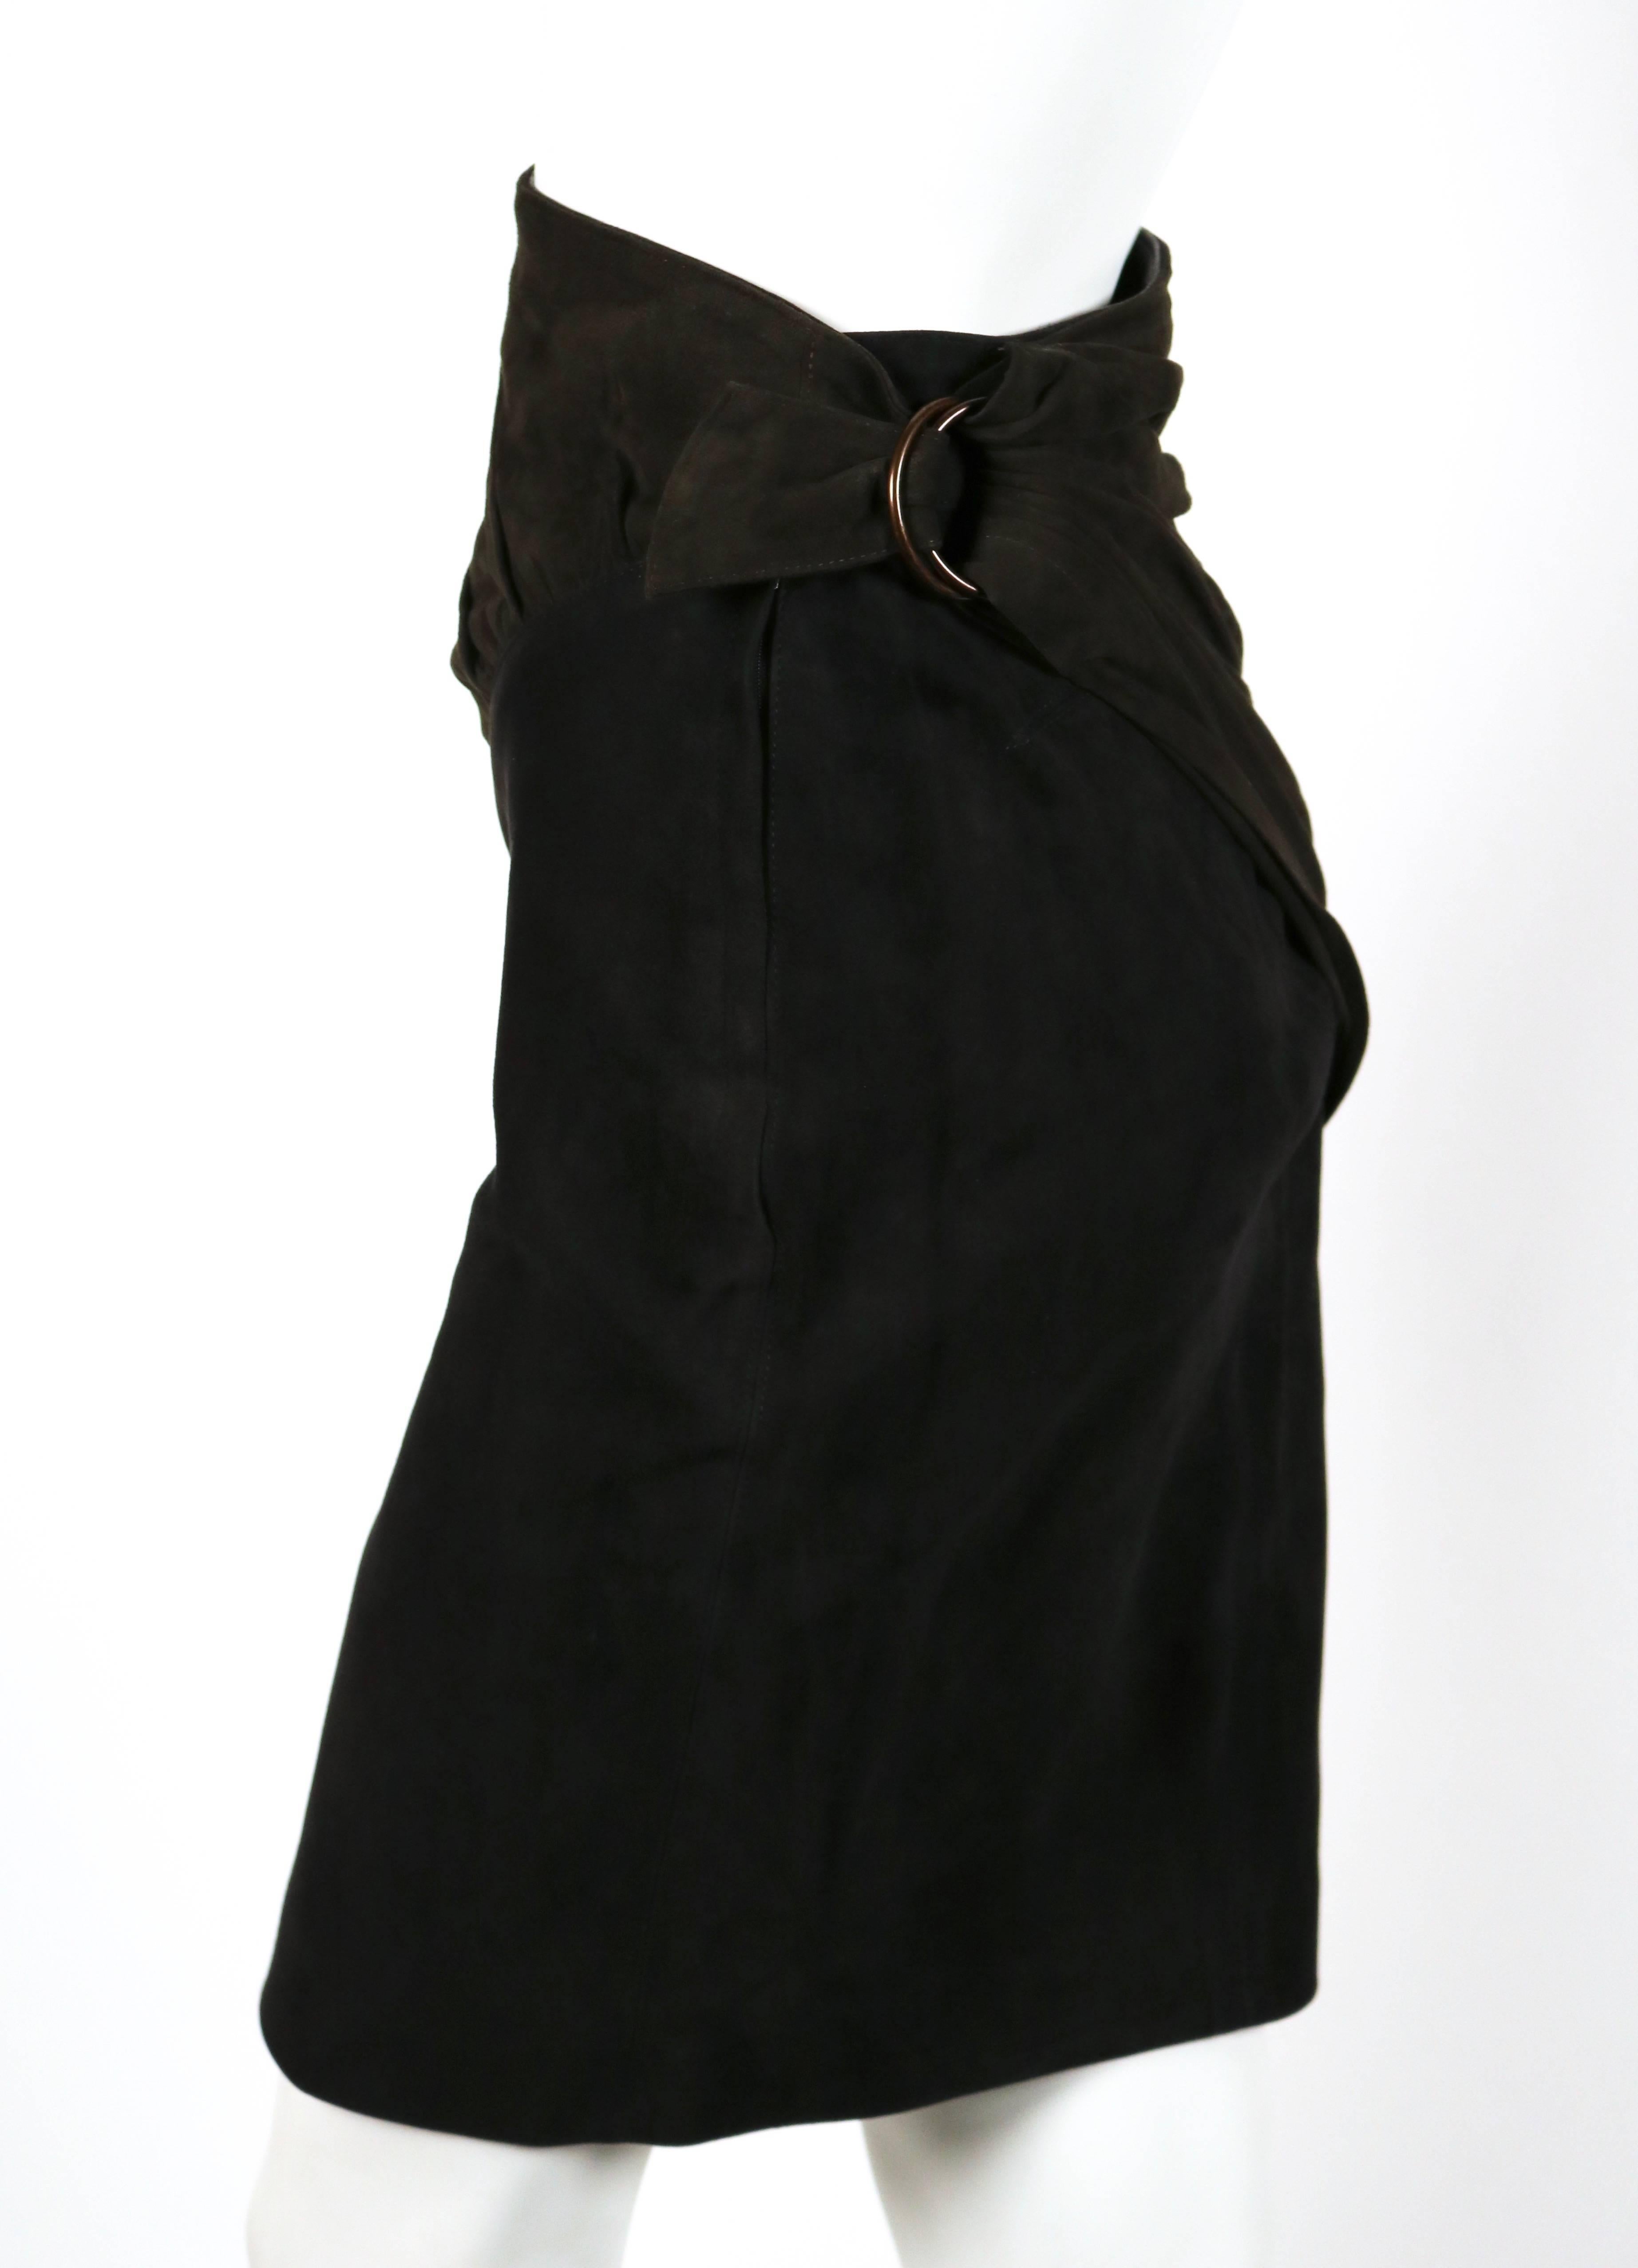 Black 1990 AZZEDINE ALAIA olive and black suede skirt with ruching and buckle